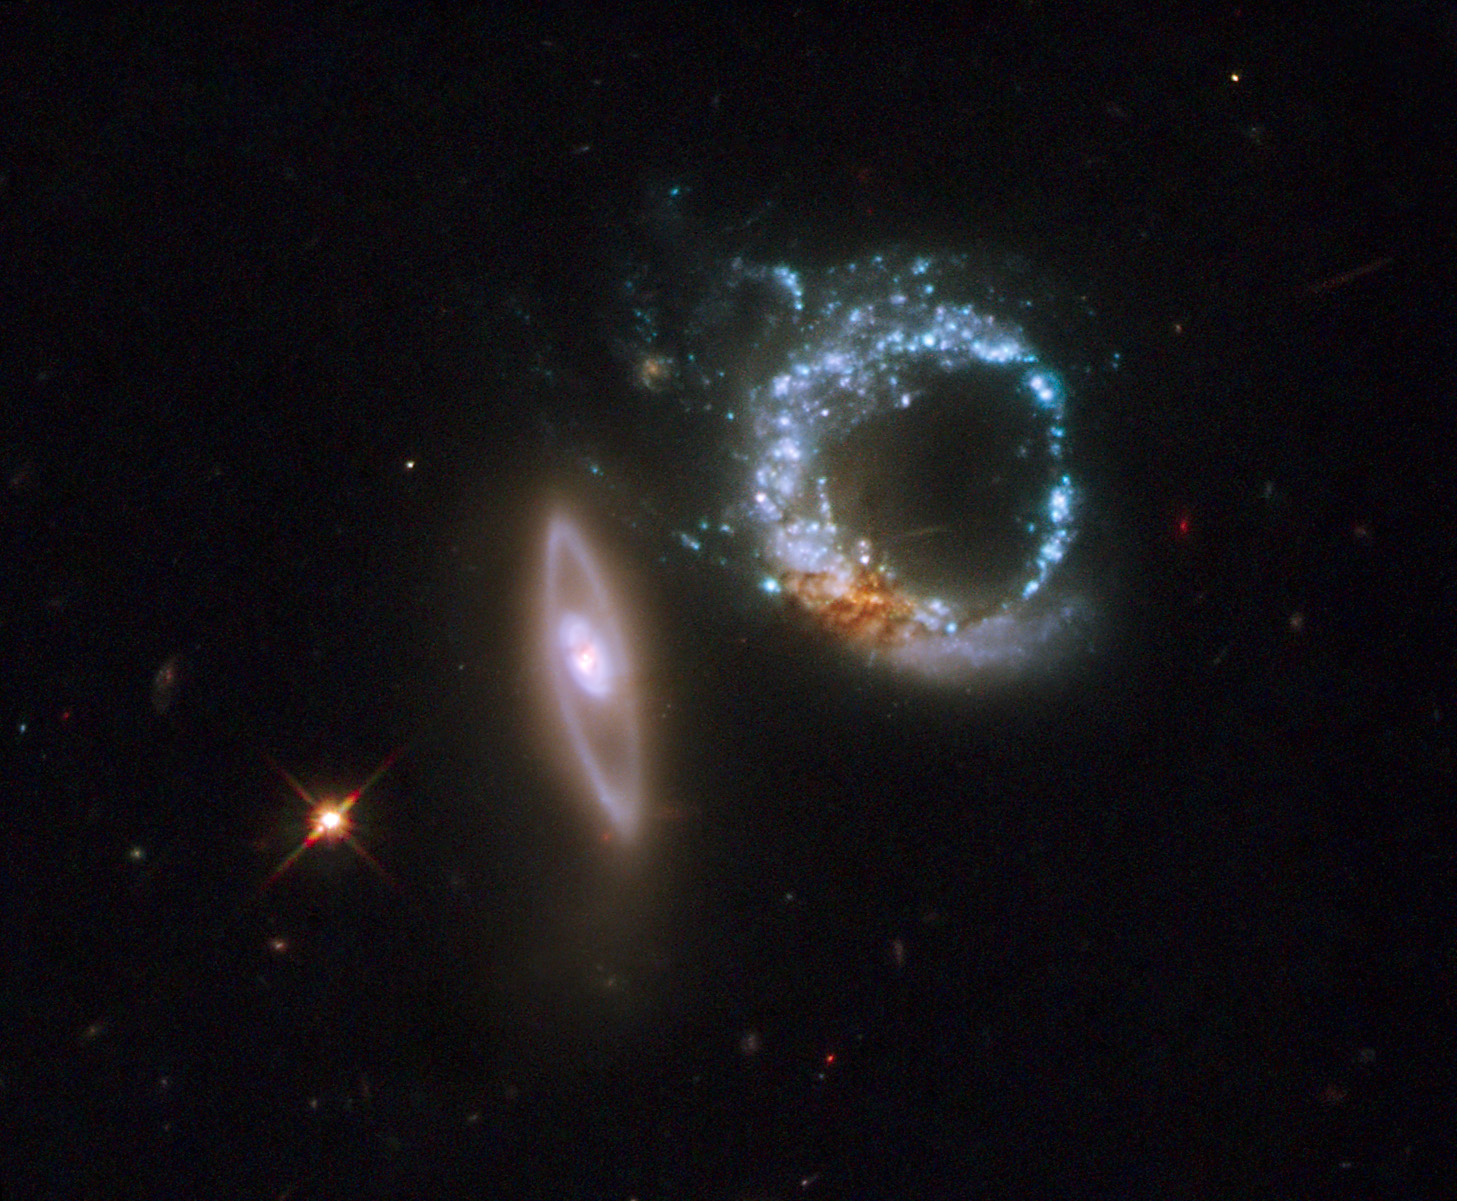 The Double Ring Galaxies of Arp 147 from Hubble